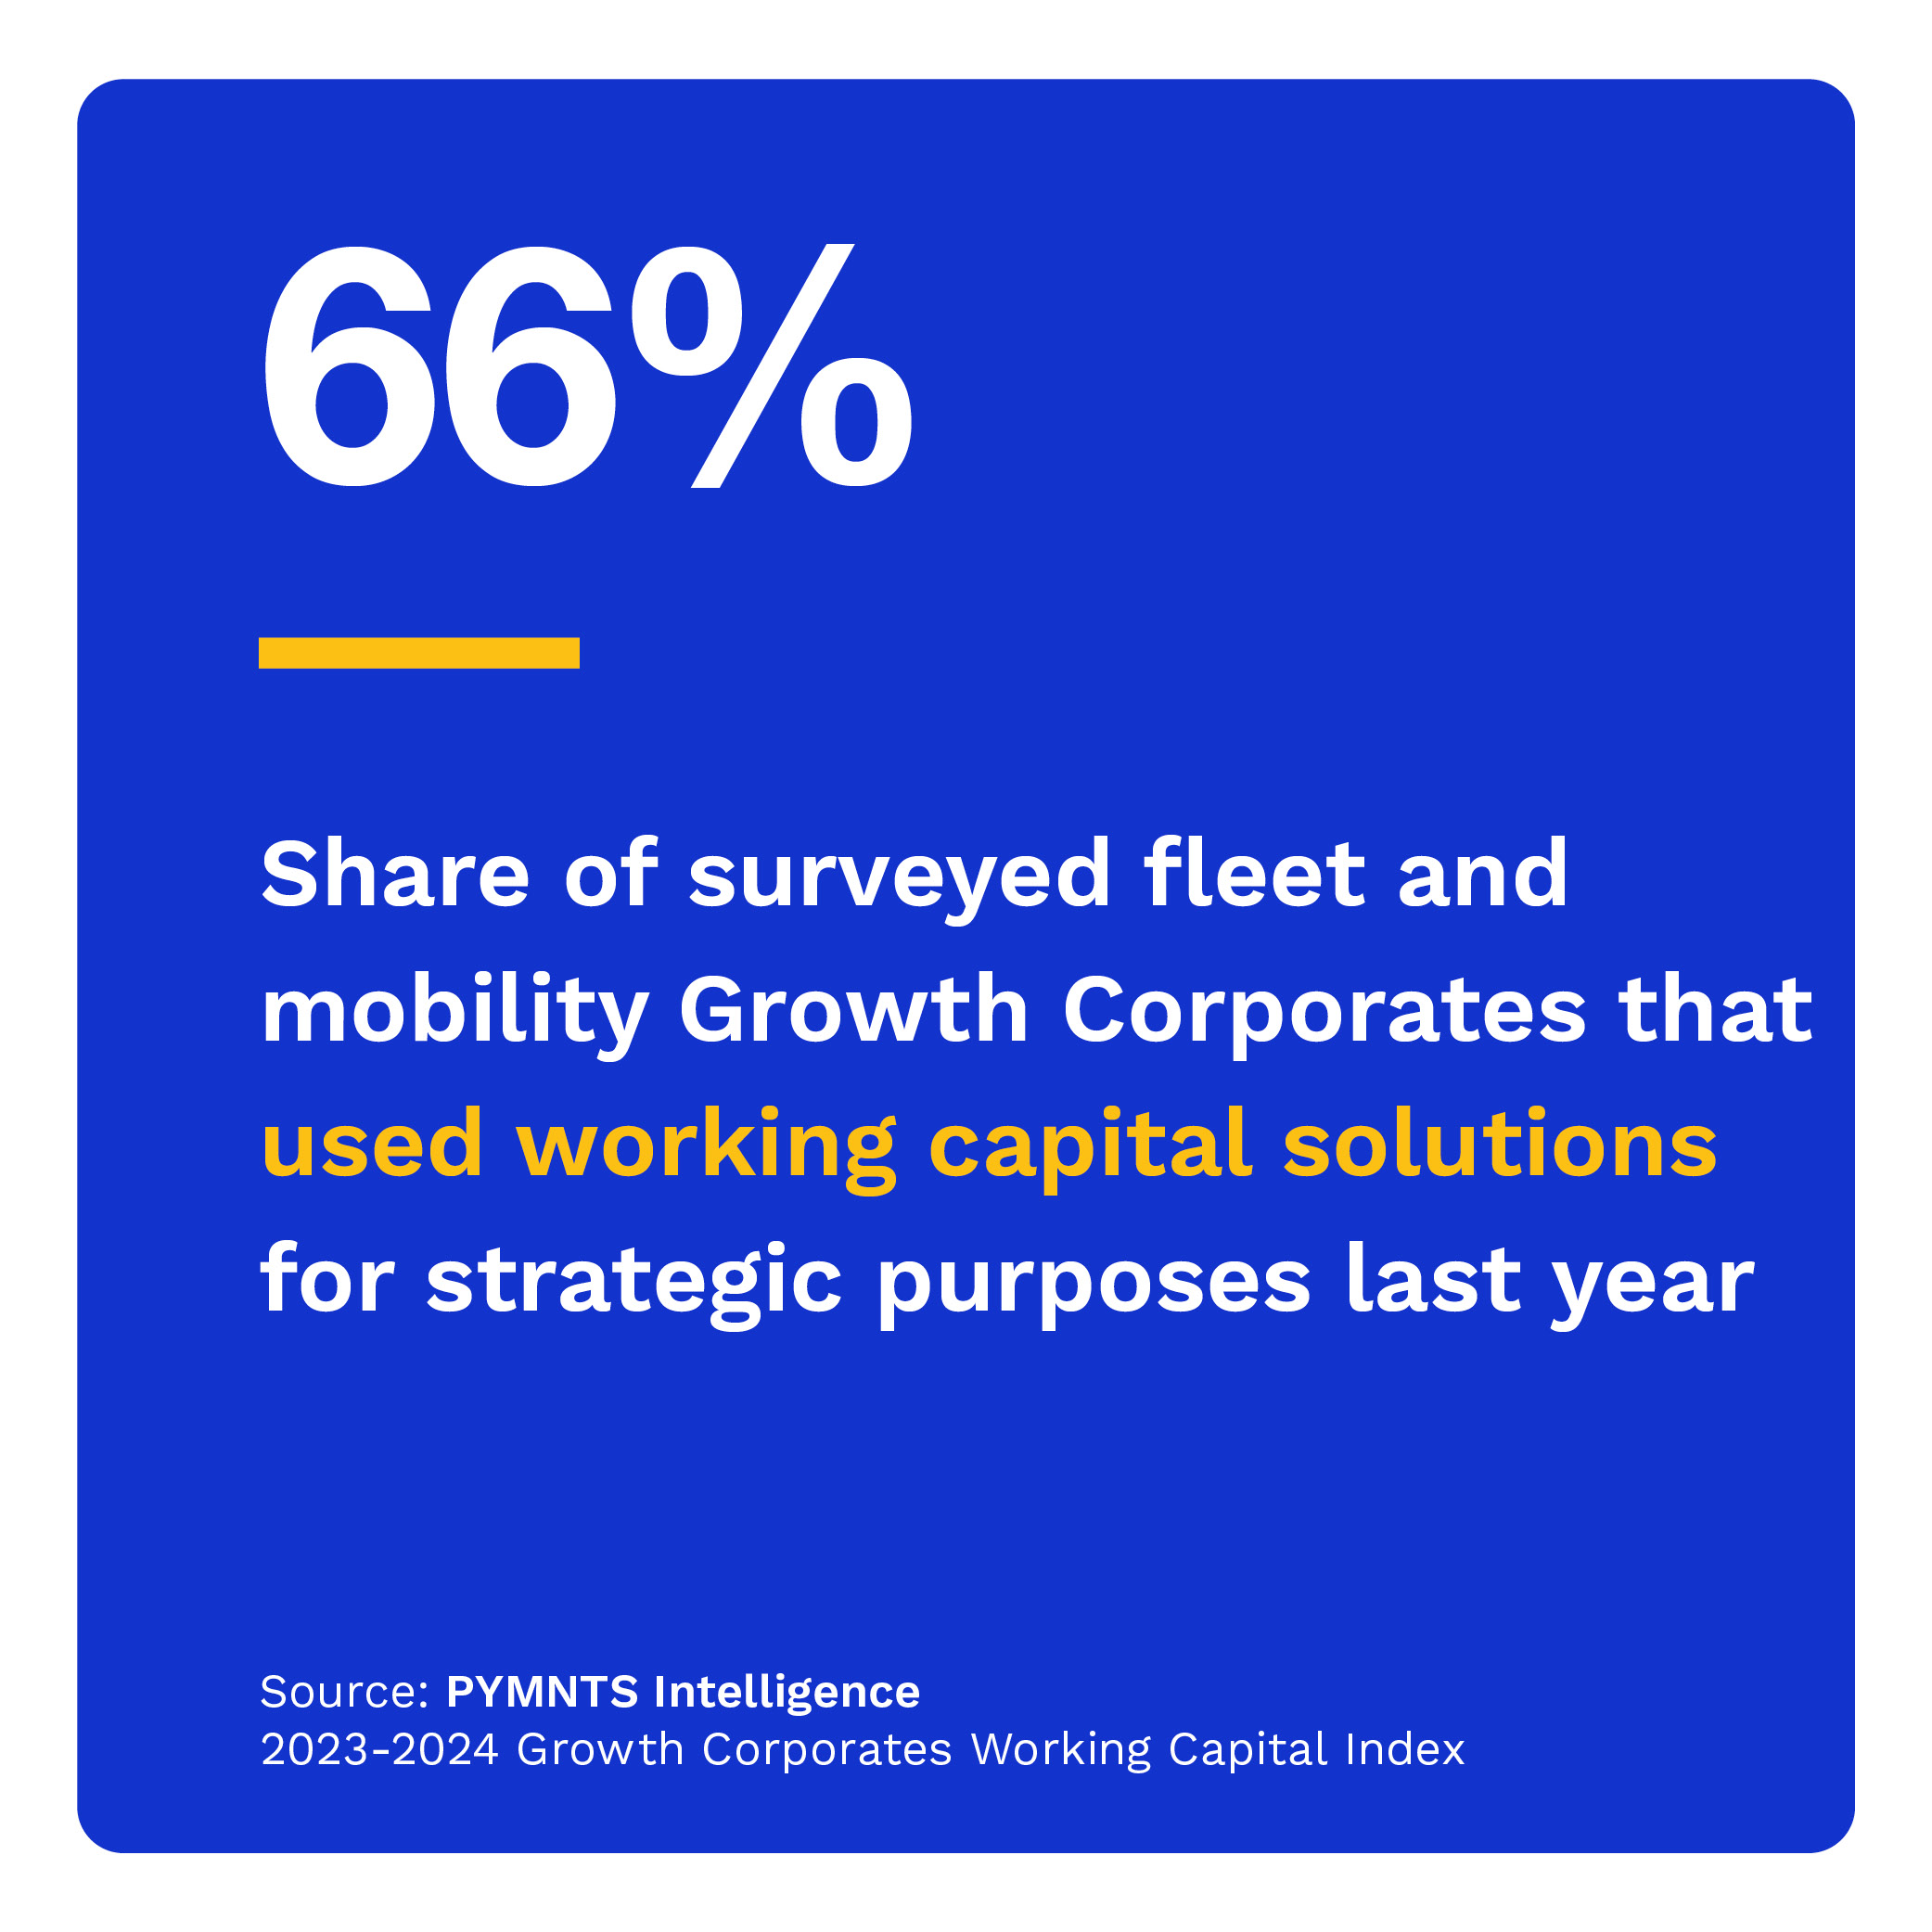 66%: Share of fleet and mobility Growth Corporates that used working capital solutions for strategic purposes last year